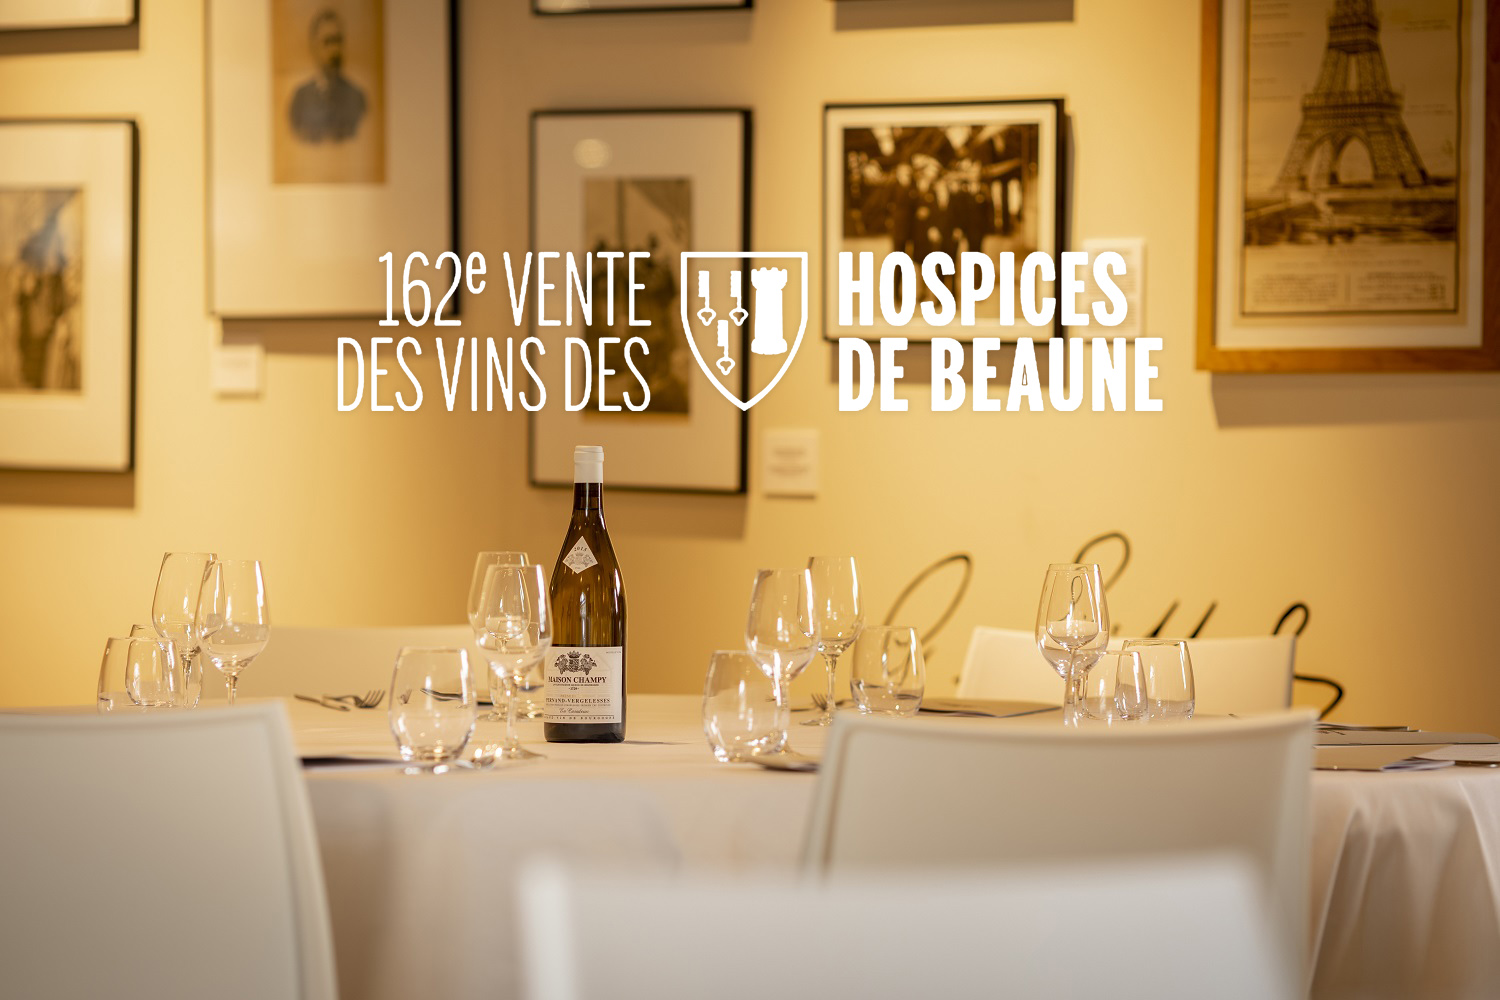 Gala dinner of the Hospices de Beaune